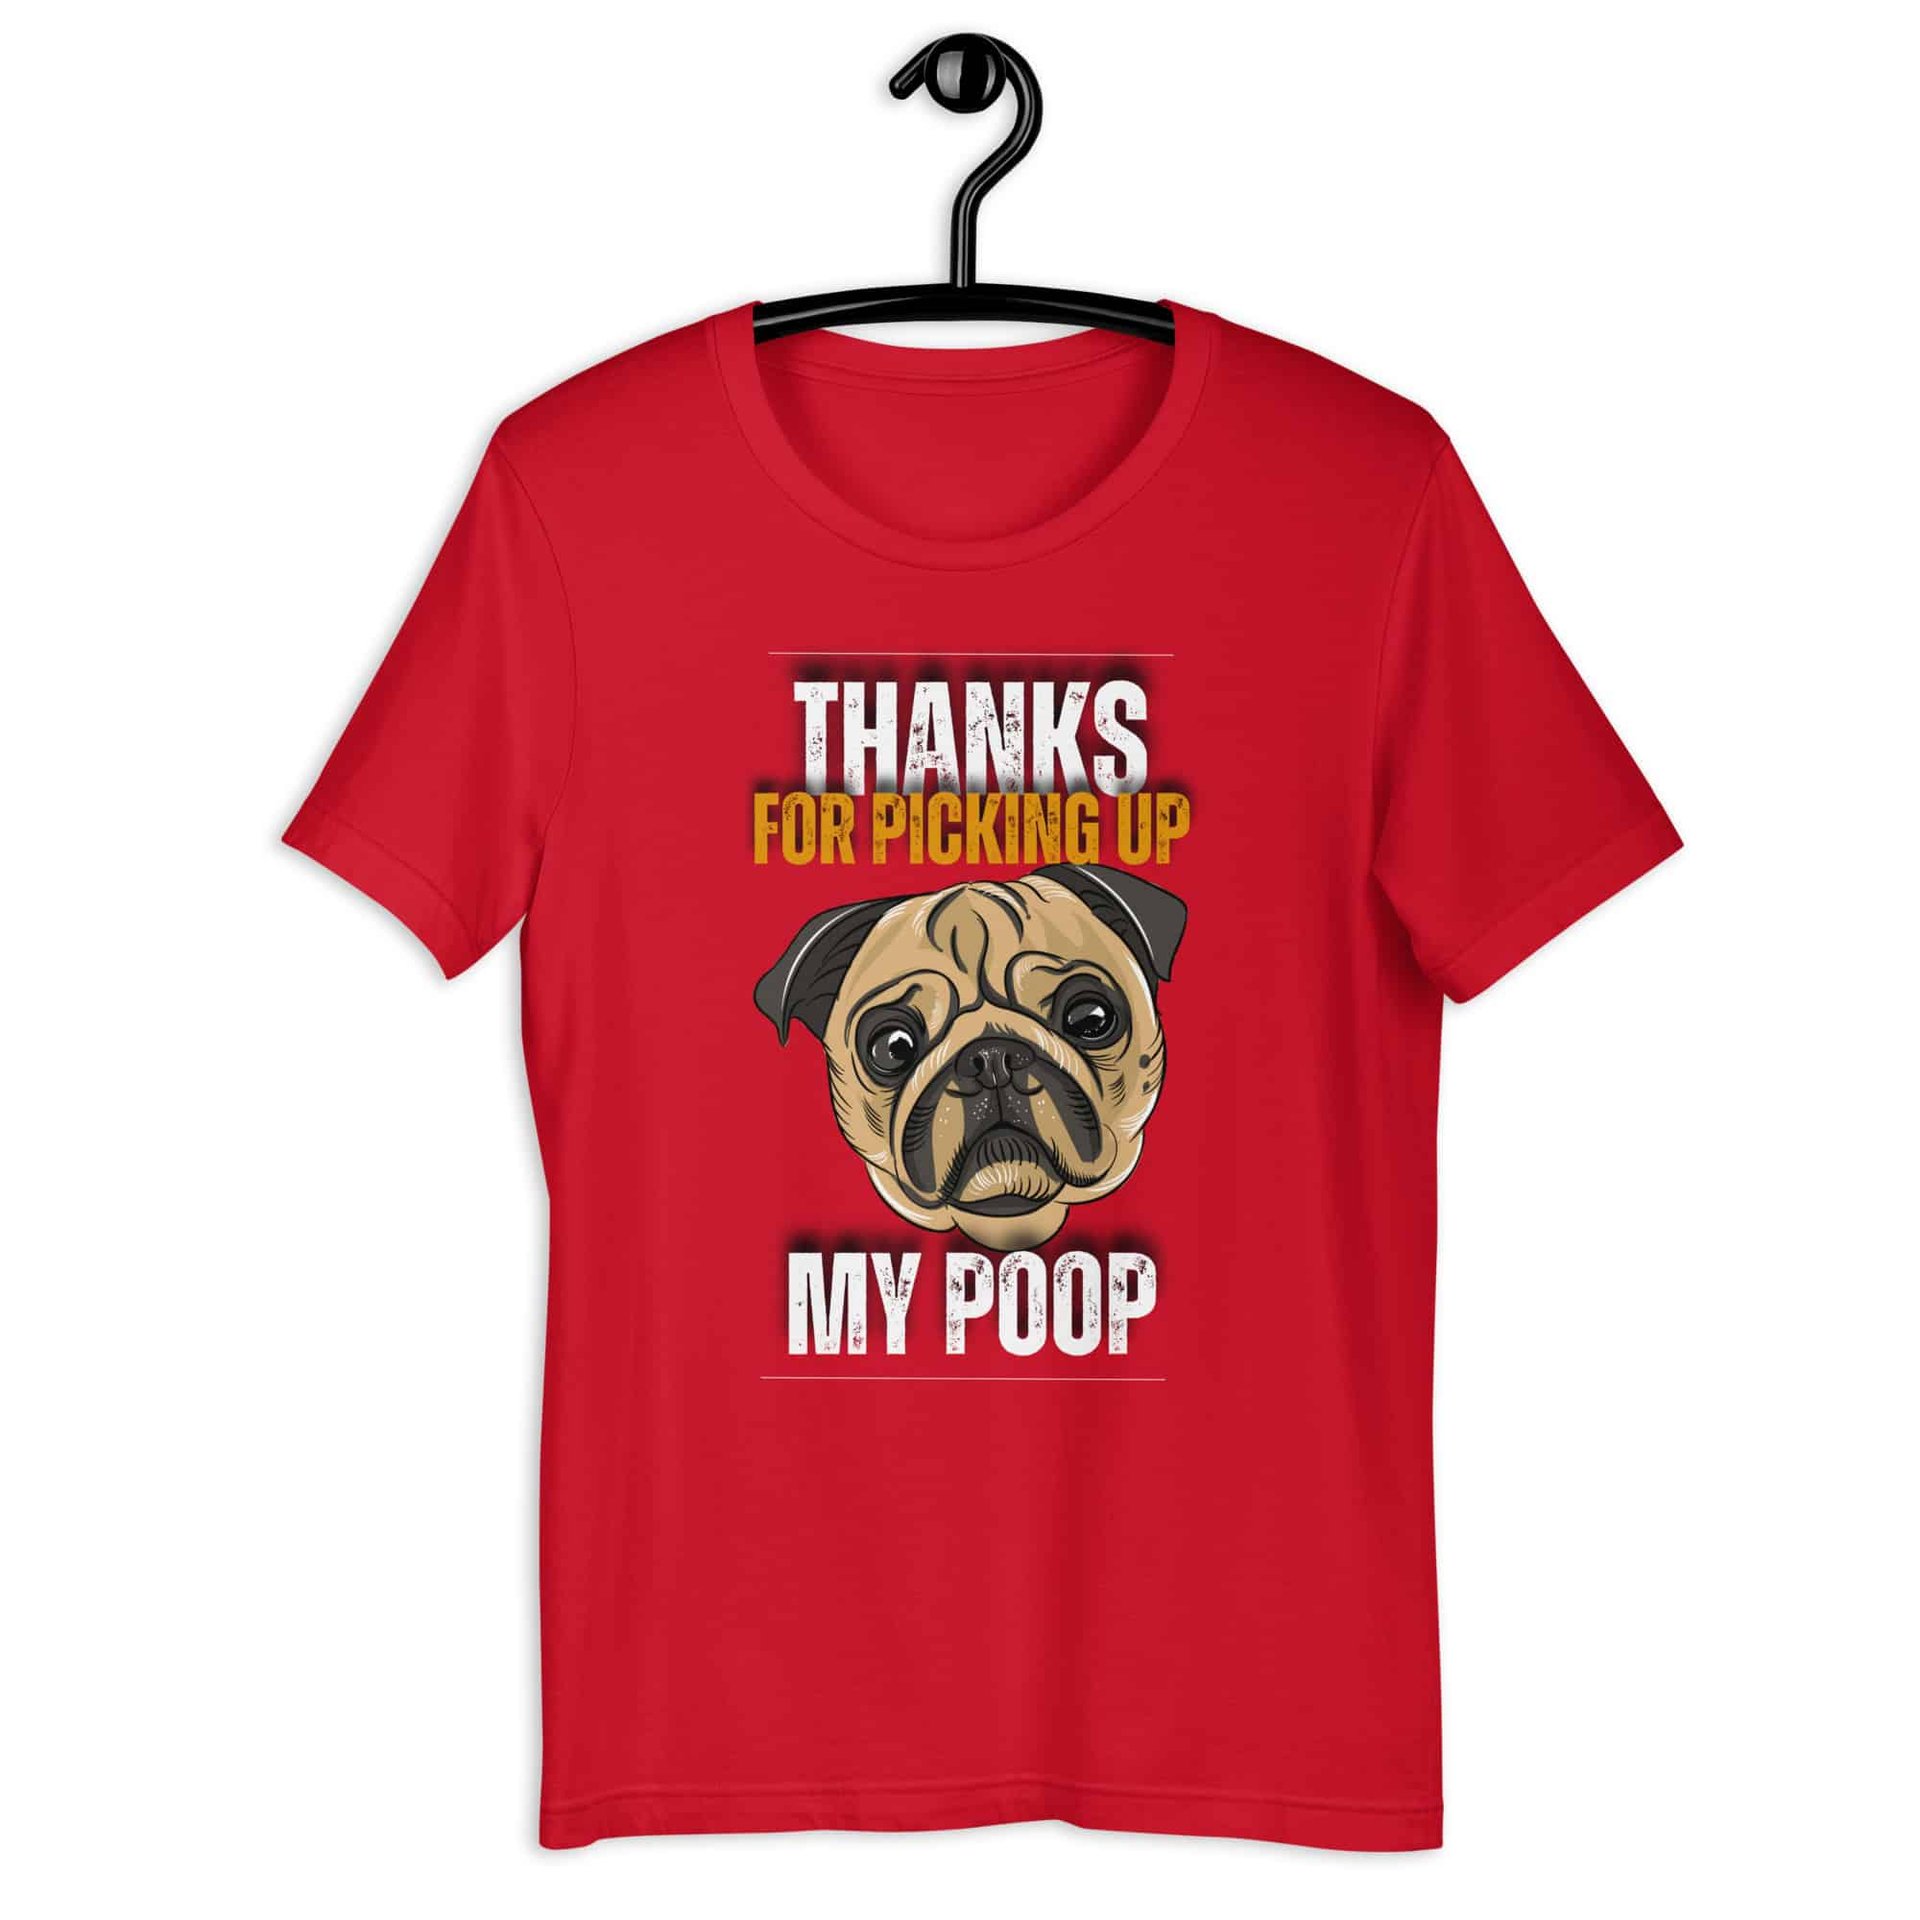 Thanks For Picking Up My POOP Funny Bulldog Unisex T-Shir. Red